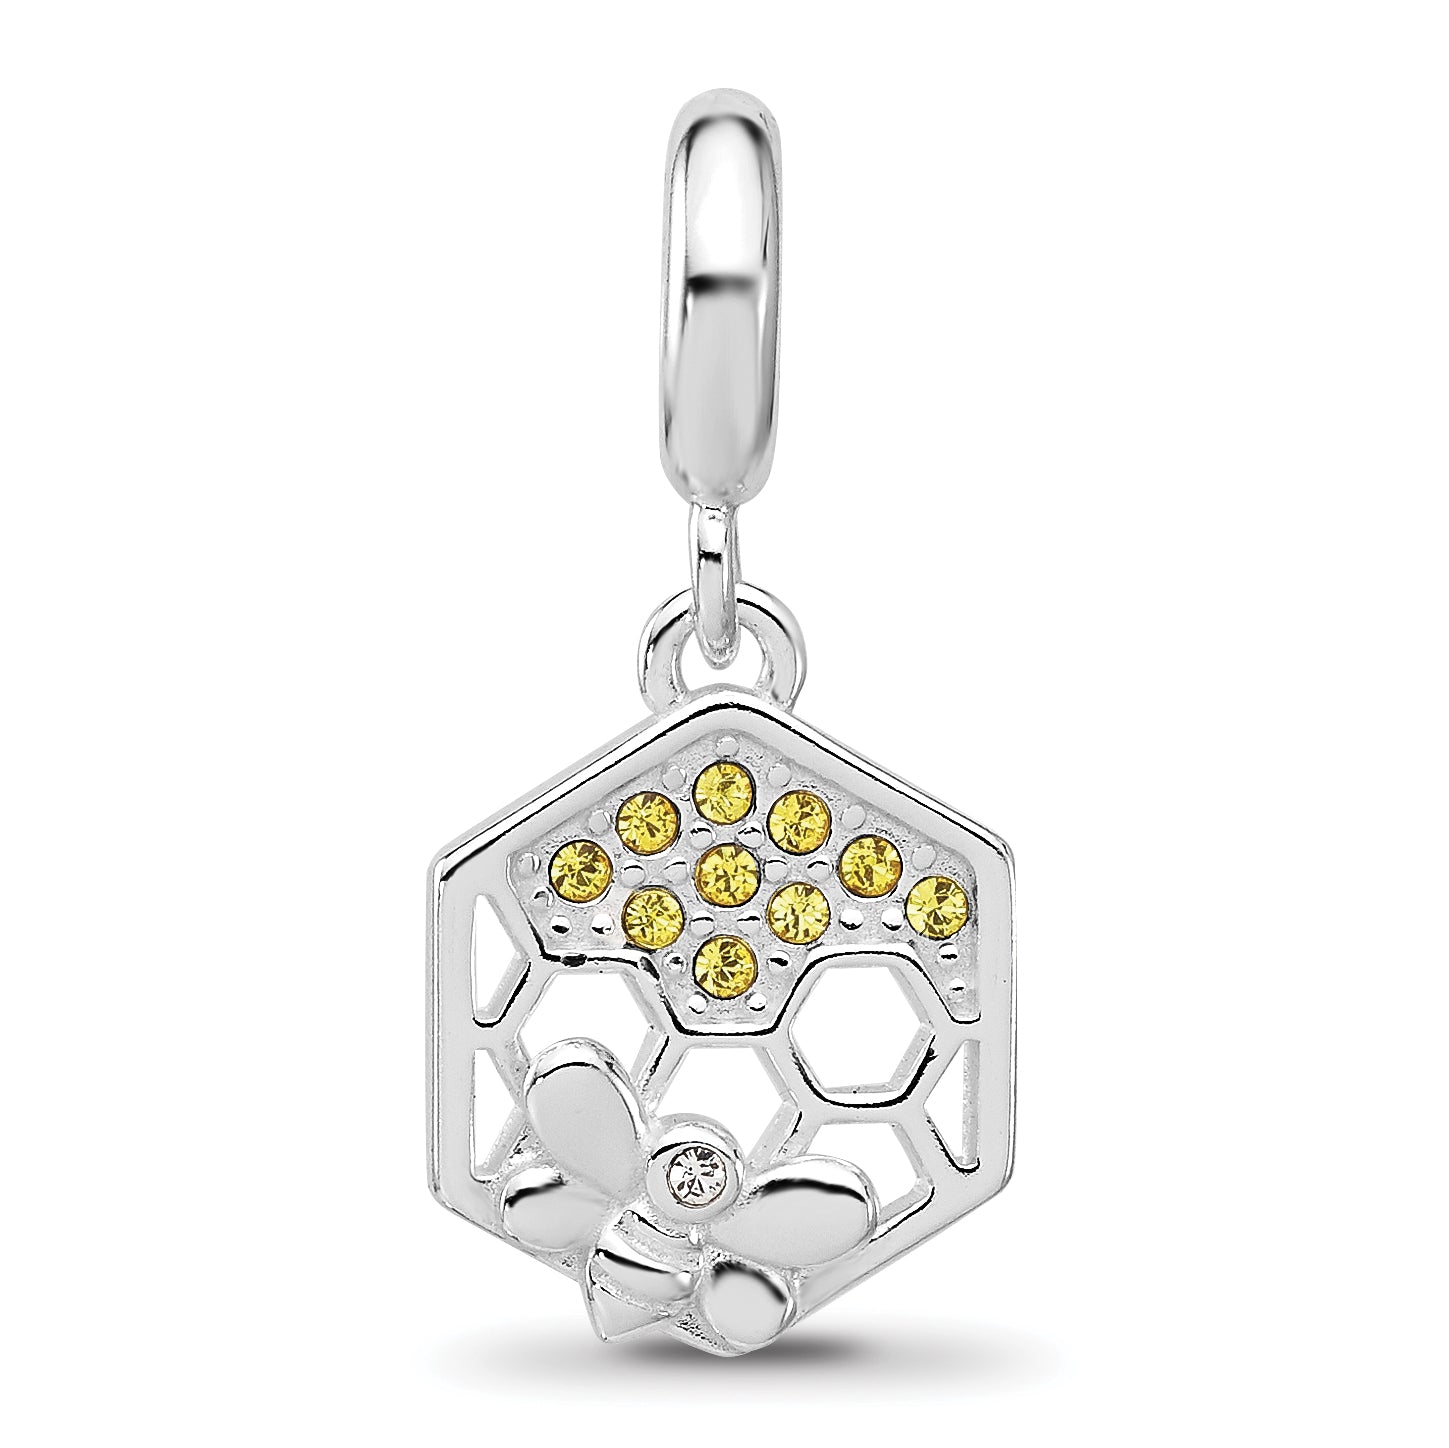 SS Reflections Rh-plated CZ Bee with Honeycomb Dangle Bead